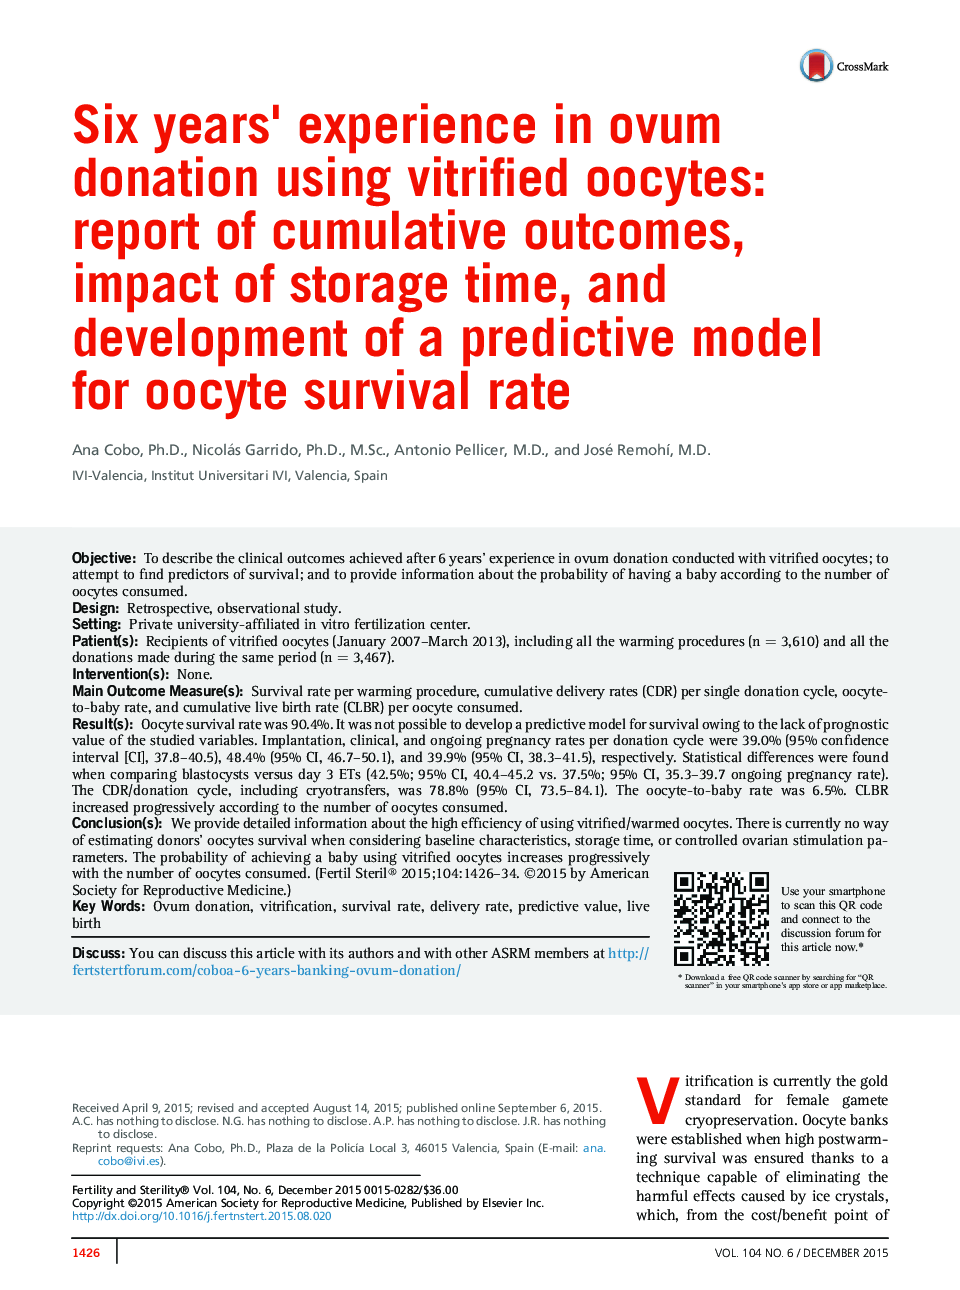 Six years' experience in ovum donation using vitrified oocytes: report of cumulative outcomes, impact of storage time, and development of a predictive model for oocyte survival rate